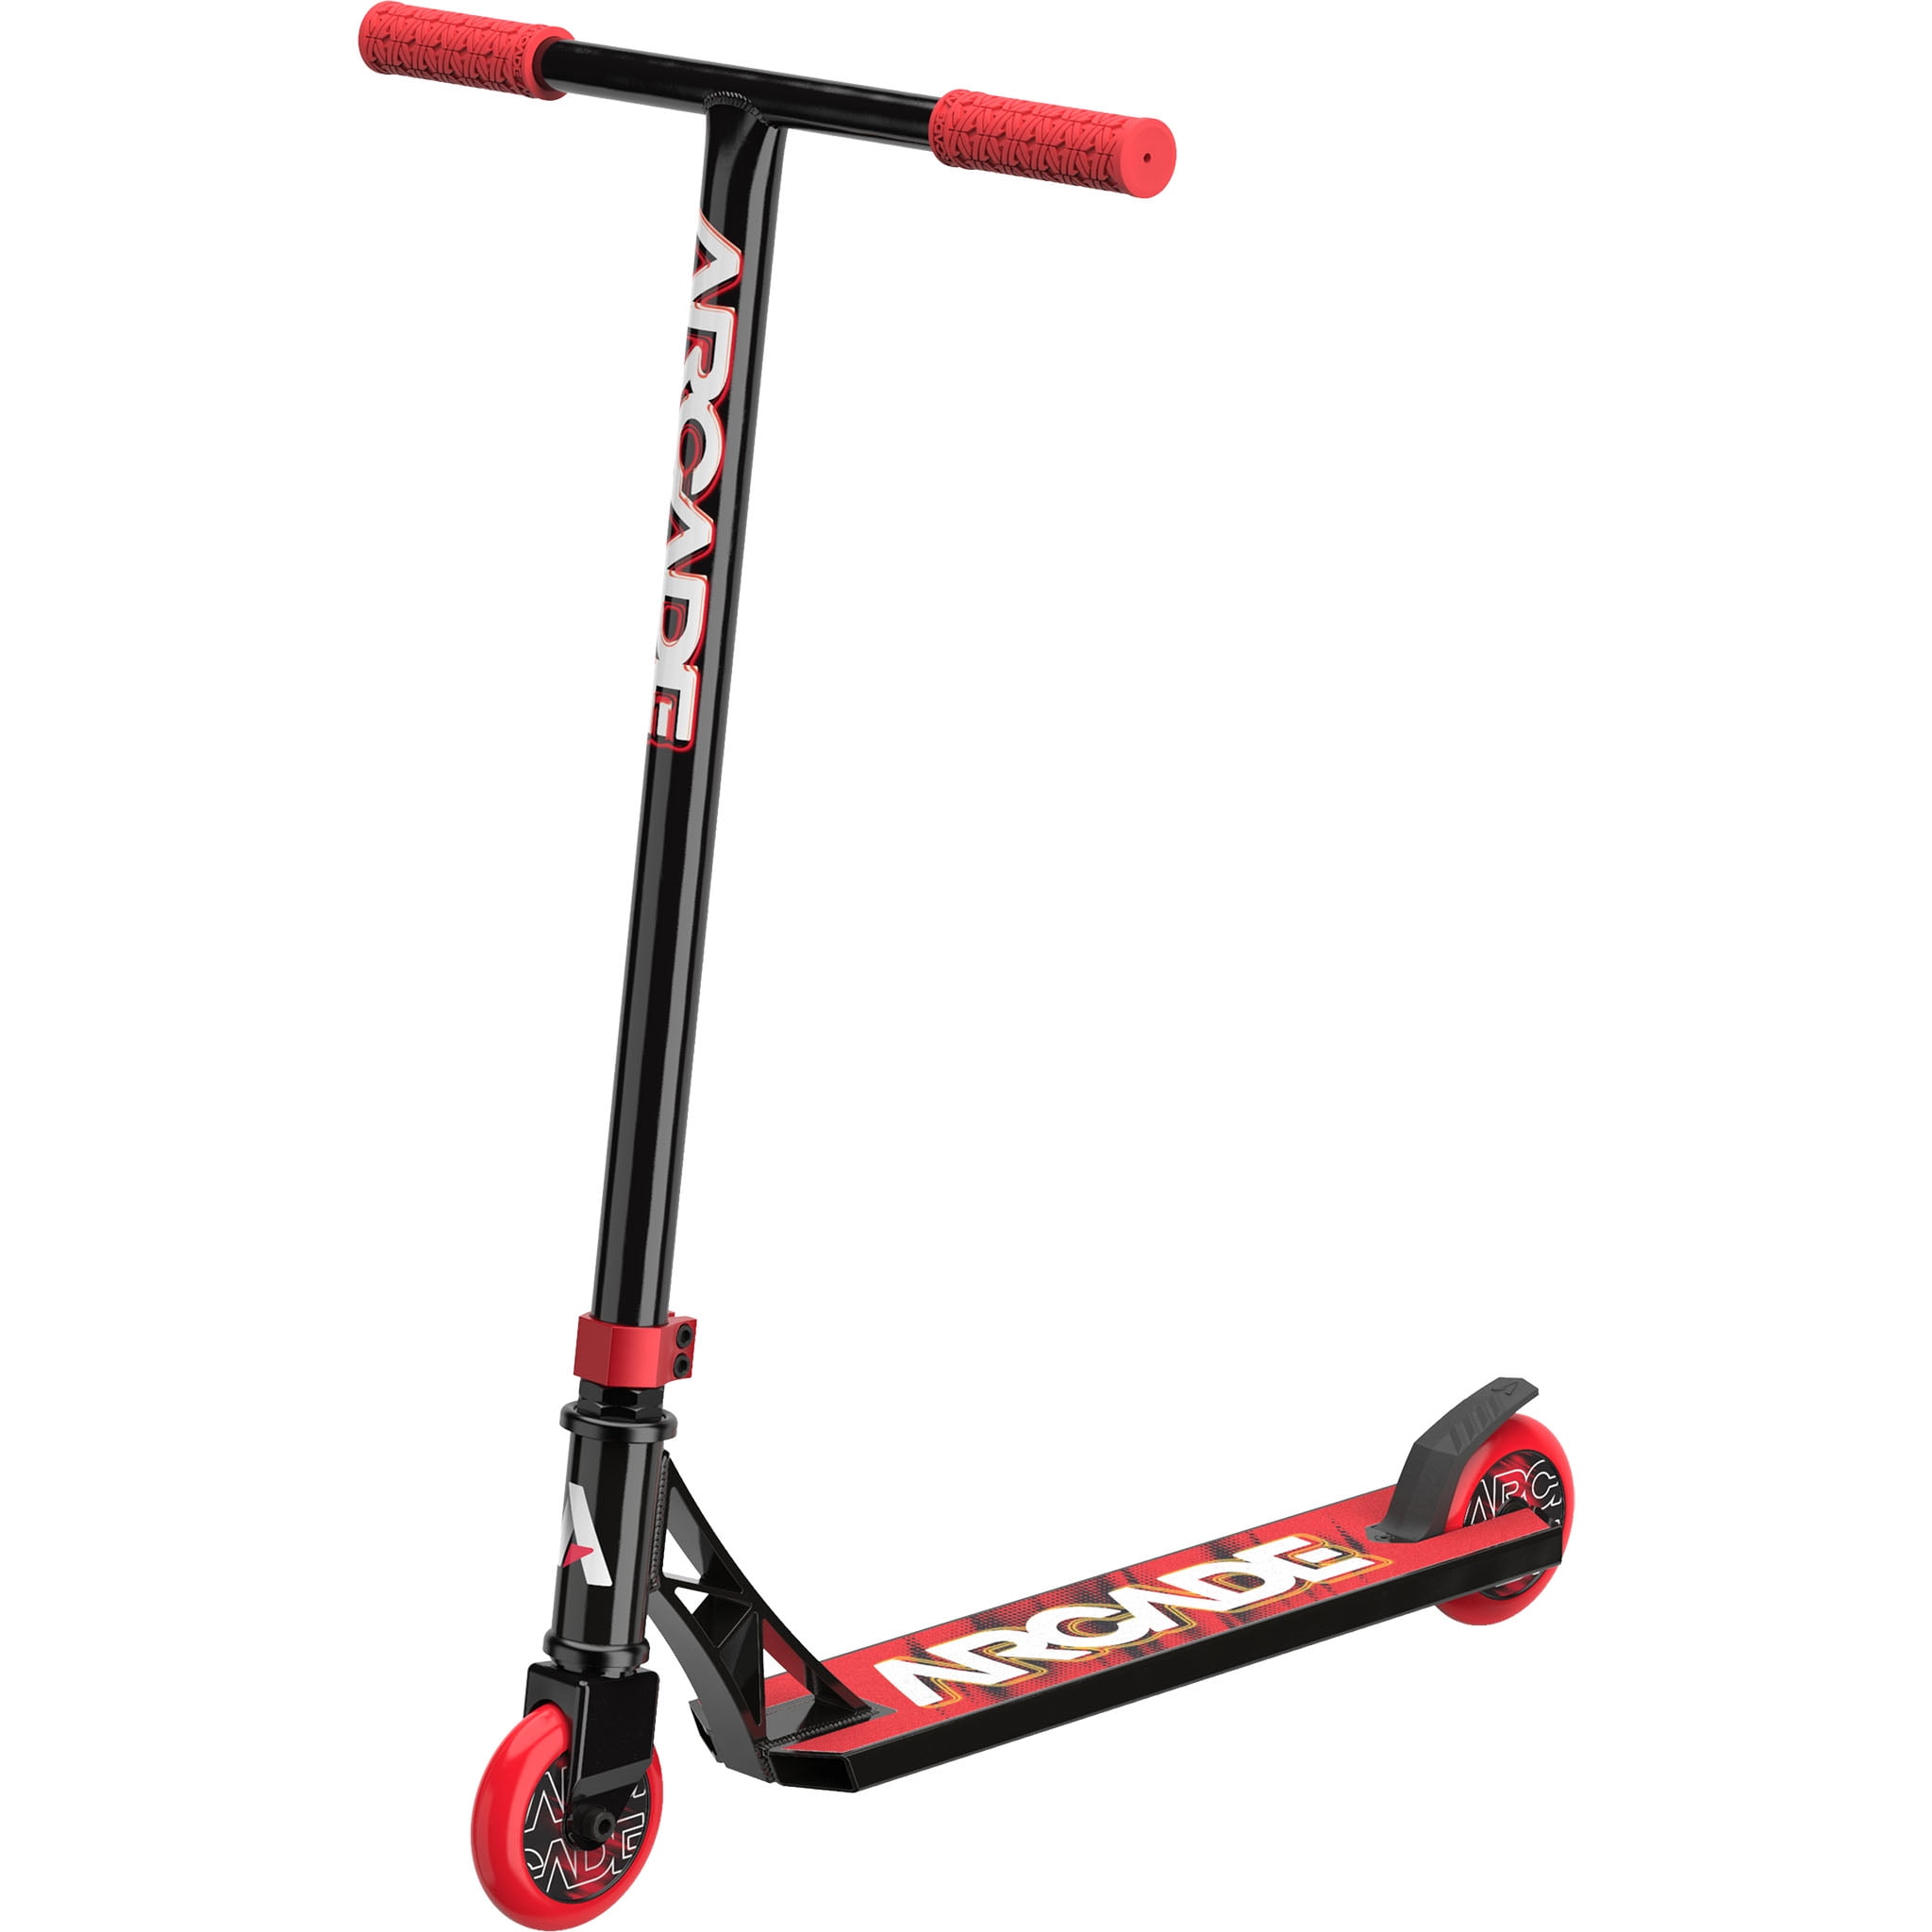 STUNT SCOOTER NEW Stunt Kick Scooter Adult Kids Ride Red 